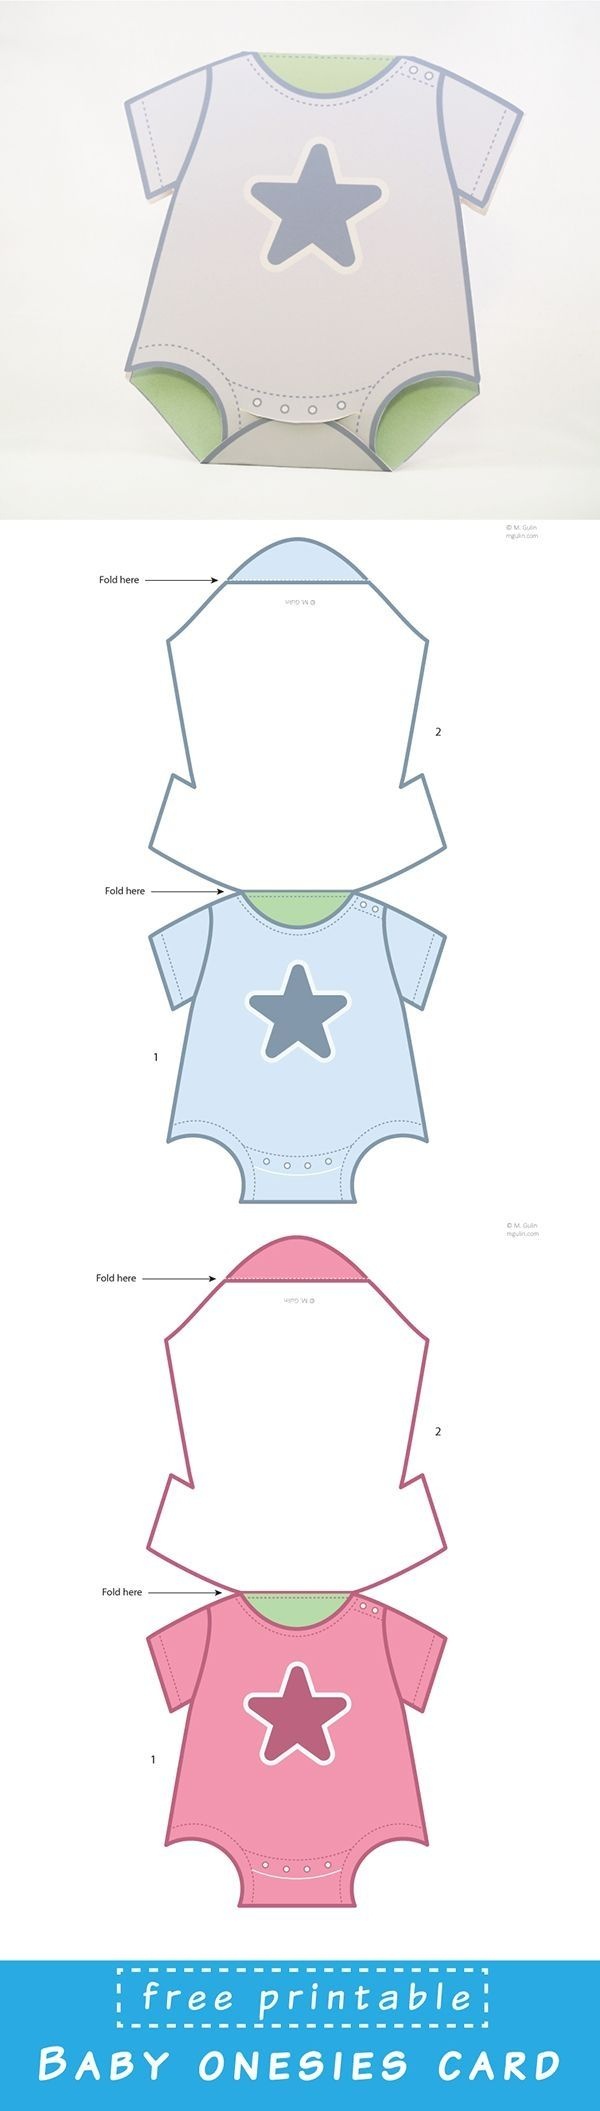 Free Printable Baby Onesies Card Template. Just Dowload And Assemble - Free Printable Onesie Pattern